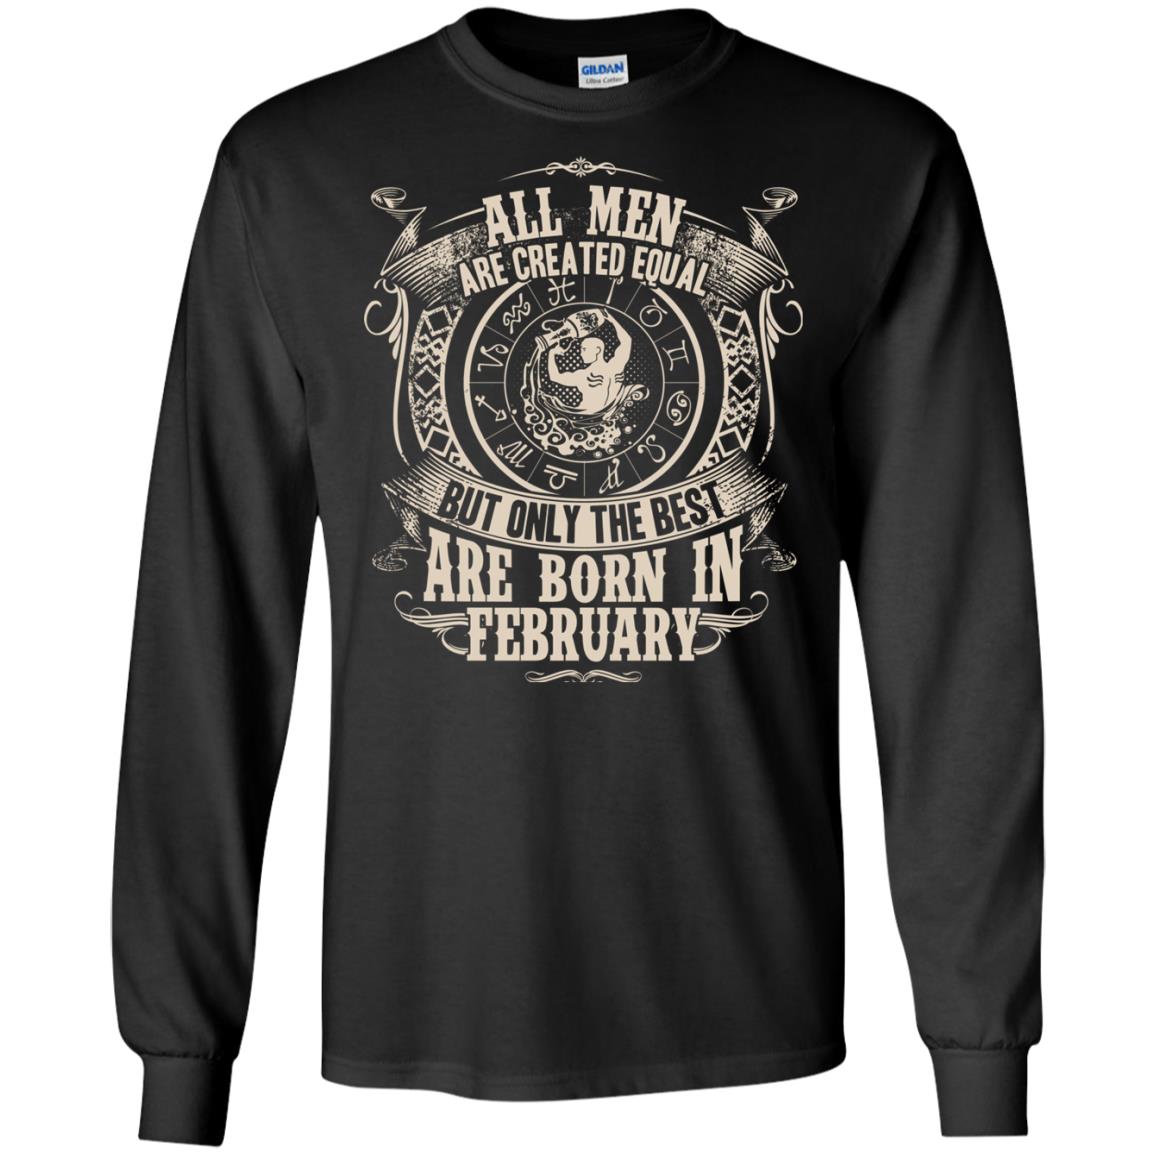 All Men Are Created Equal, But Only The Best Are Born In February T-shirtG240 Gildan LS Ultra Cotton T-Shirt